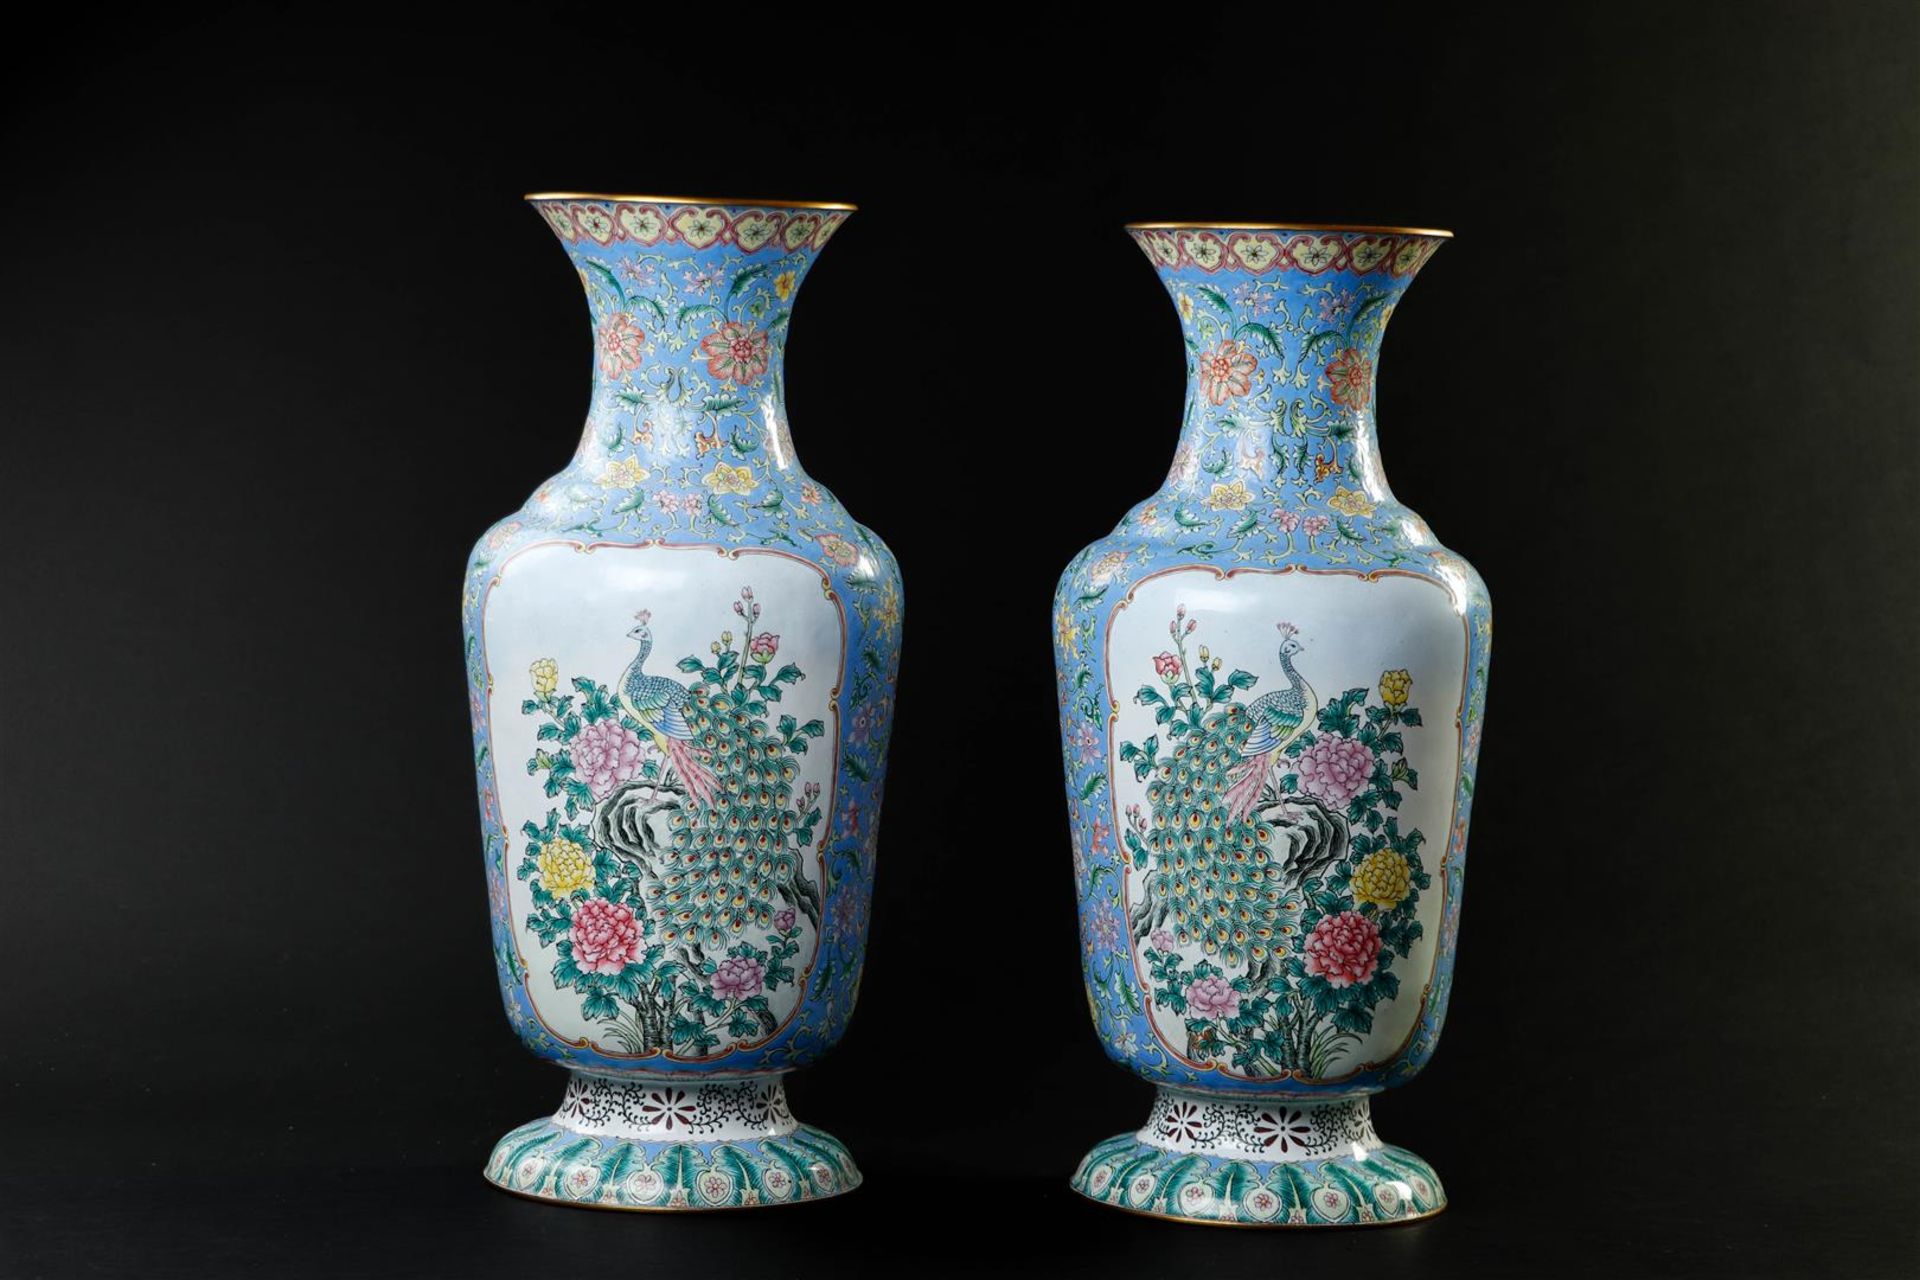 A pair of enamel famille rose vases depicting peacocks. China, 20th century.
H. 44 cm. - Image 3 of 6